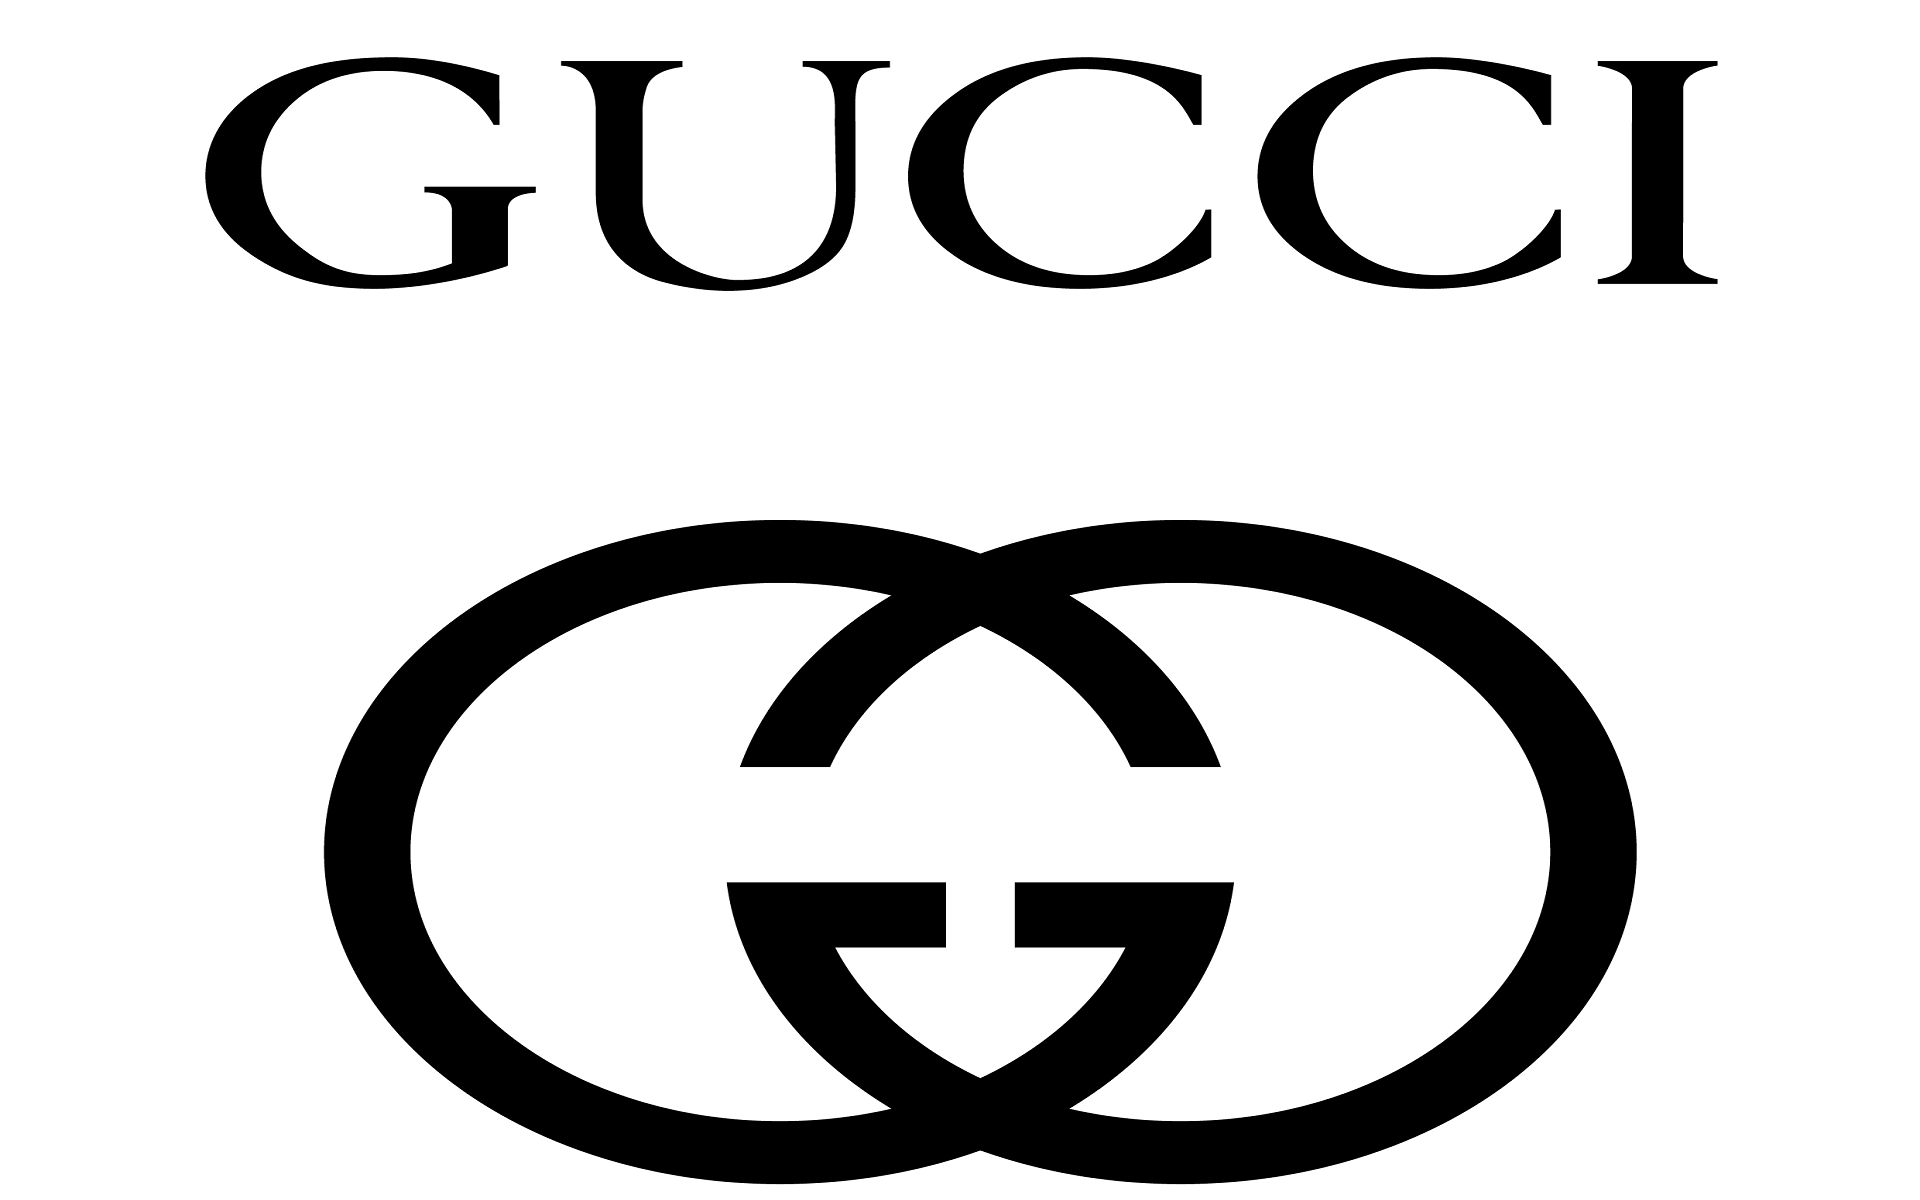 how to draw the gucci logo